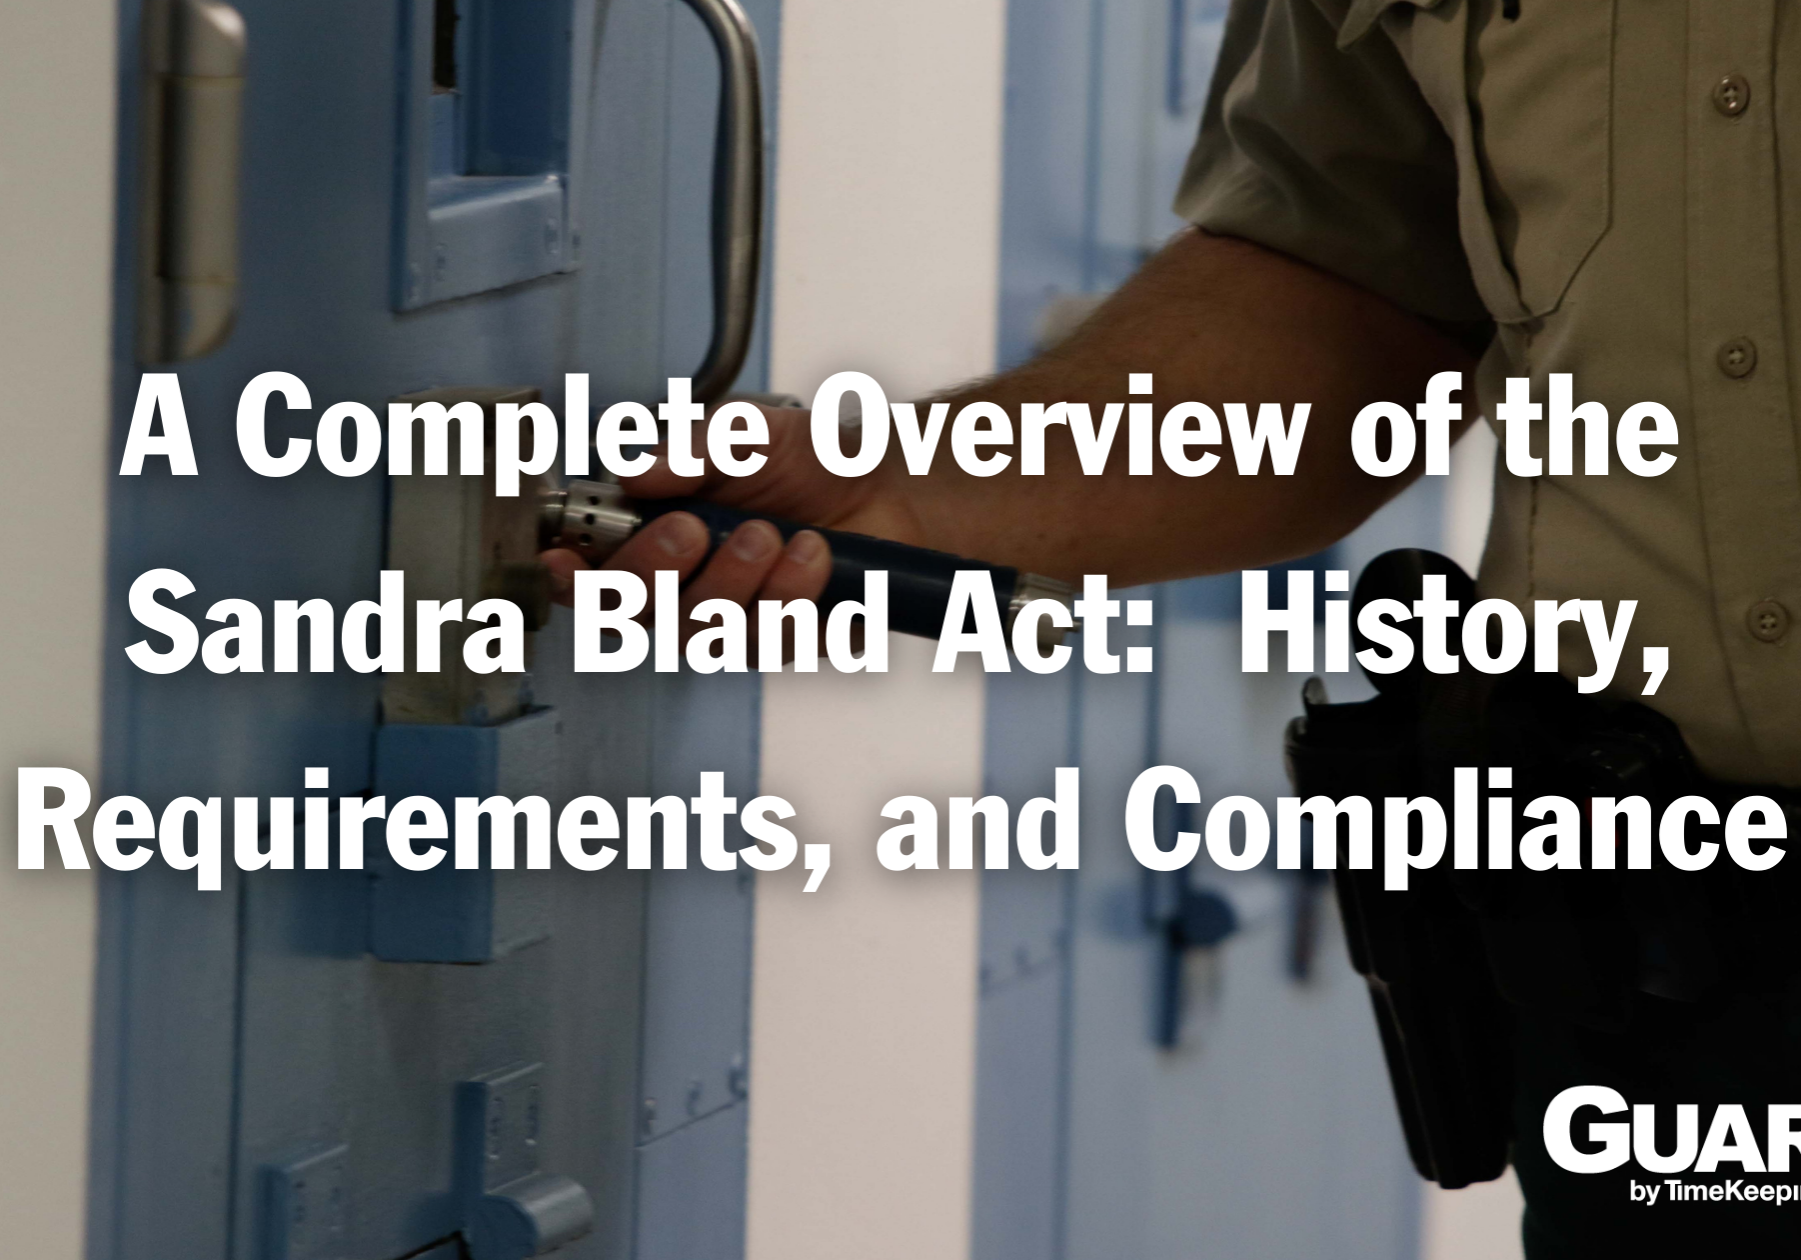 a-complete-overview-of-the-sandra-bland-act-history-requirements-and-compliance